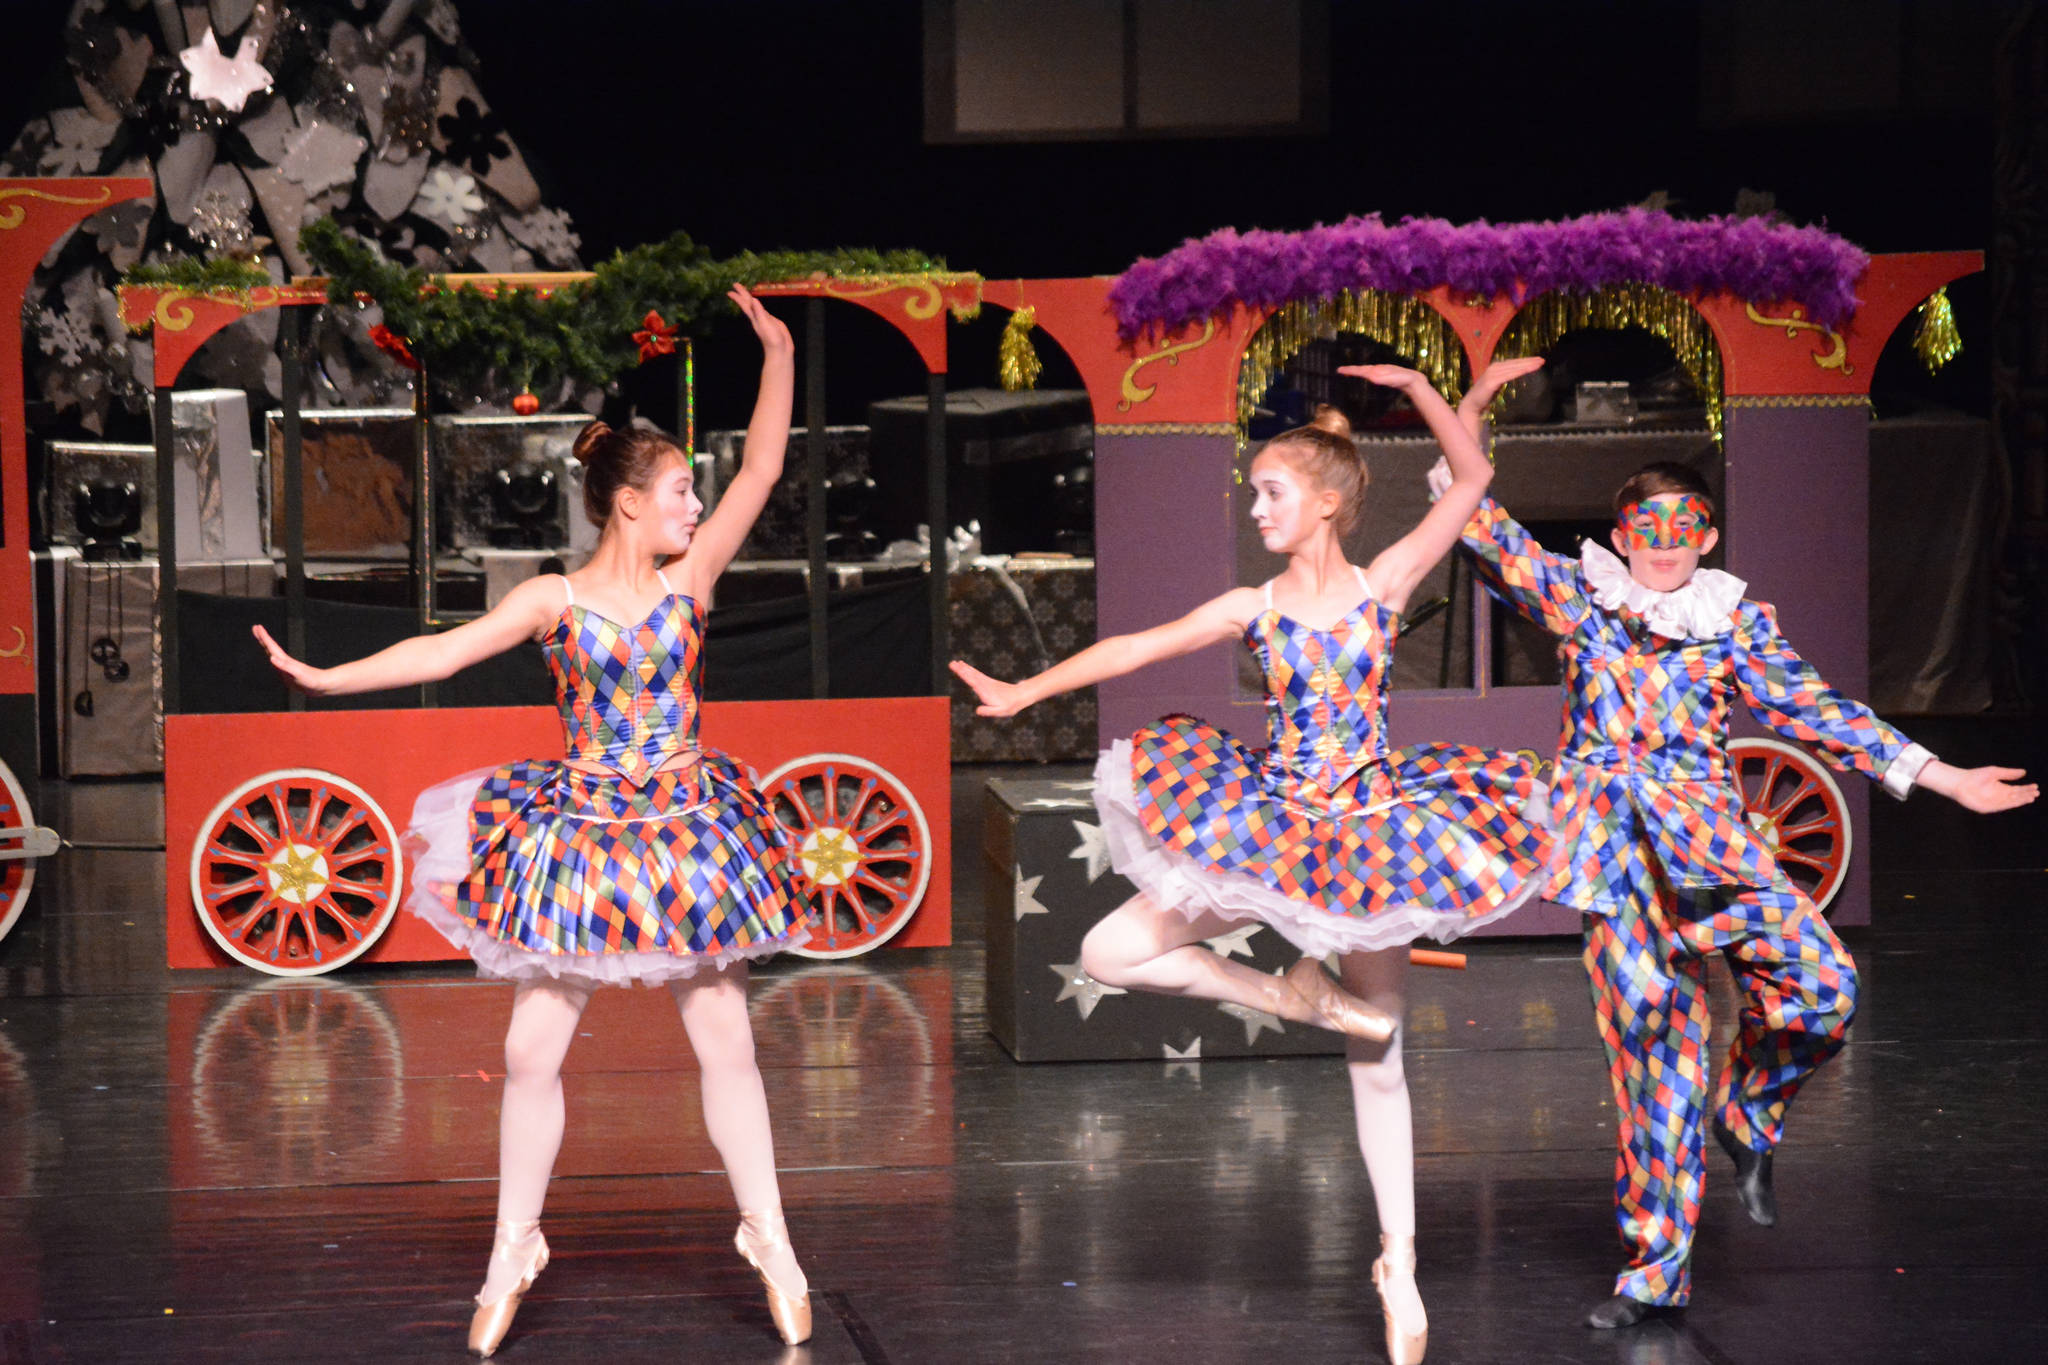 Serena Funkhauser, Ava Halstead and Lance Seneff as the harlequin toys rhearse a scene at the Mariner Theatre Friday, Nov. 24, 2017 in Homer, Alaska for the Nutcracker Ballet. (Photo by Michael Armstrong, Homer News)